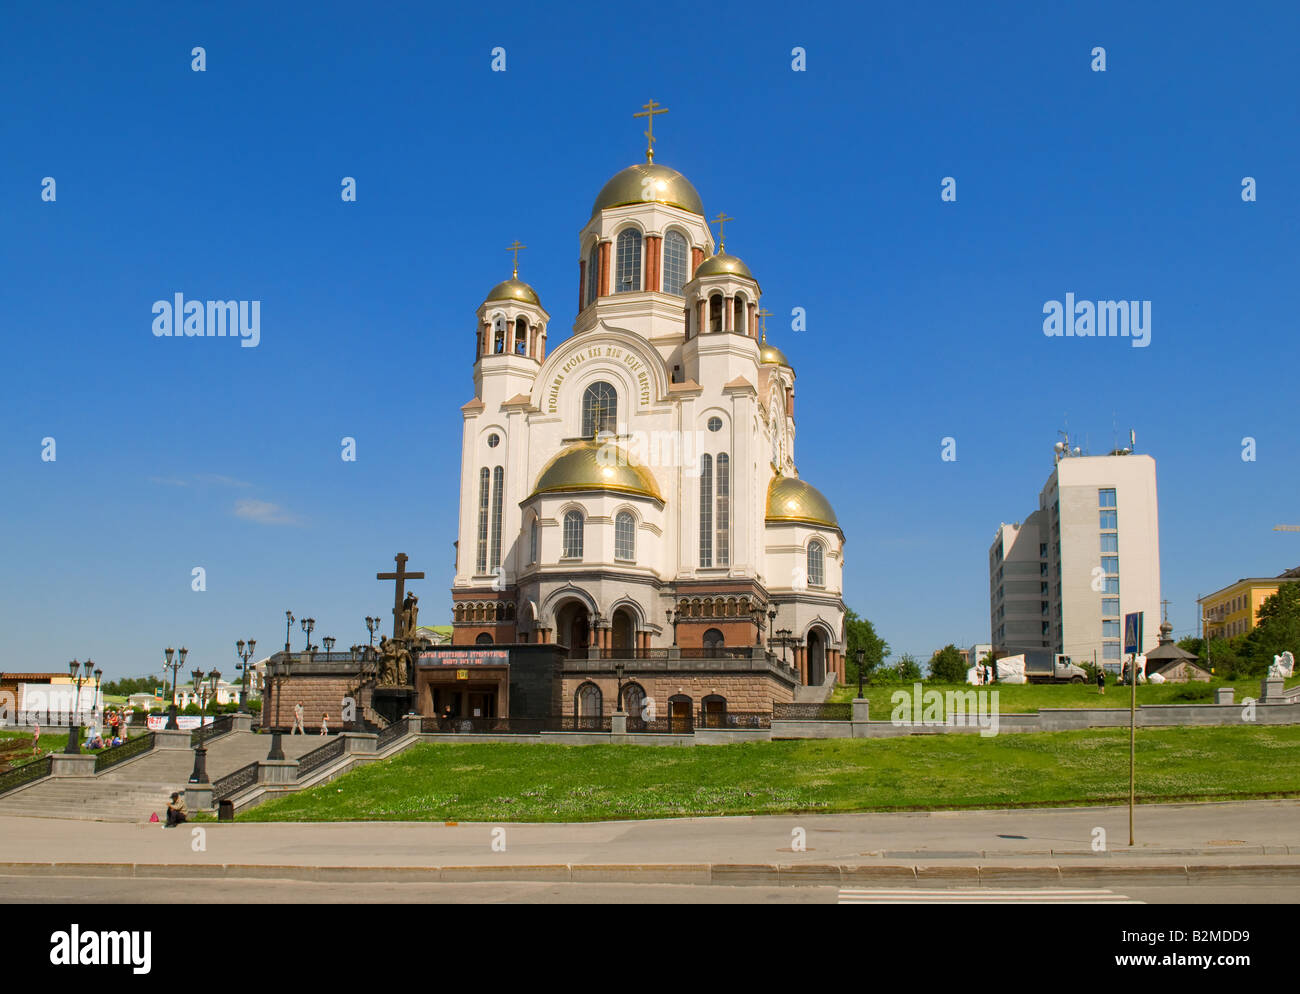 Church on Blood in Honor of All Saints Resplendent in the Russian Land Stock Photo